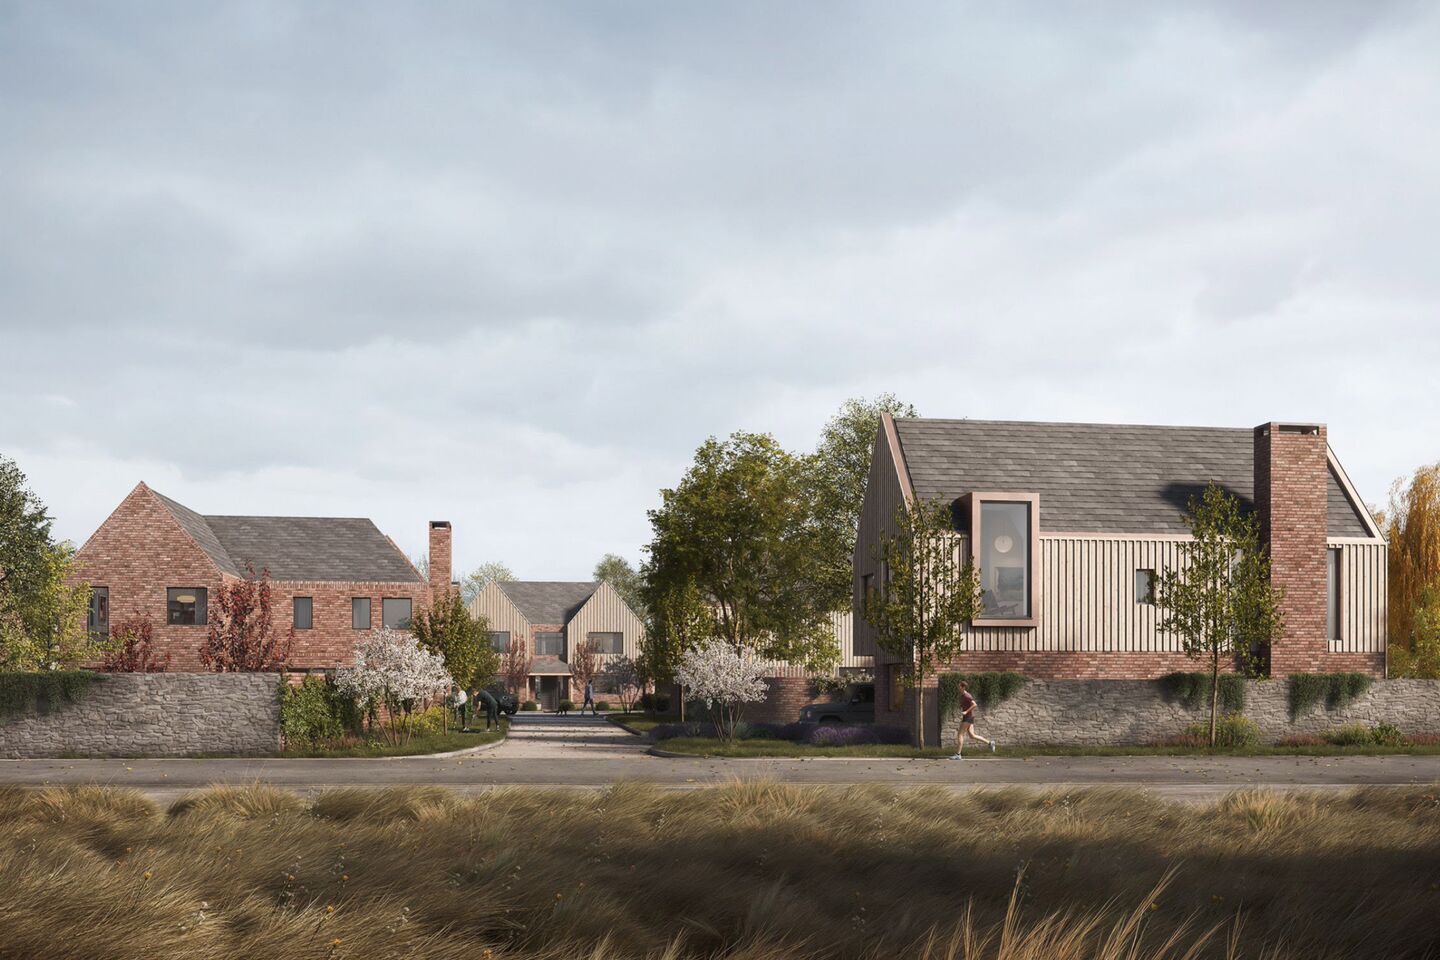 Lockley Homes Planning application submitted for 14 stylish homes